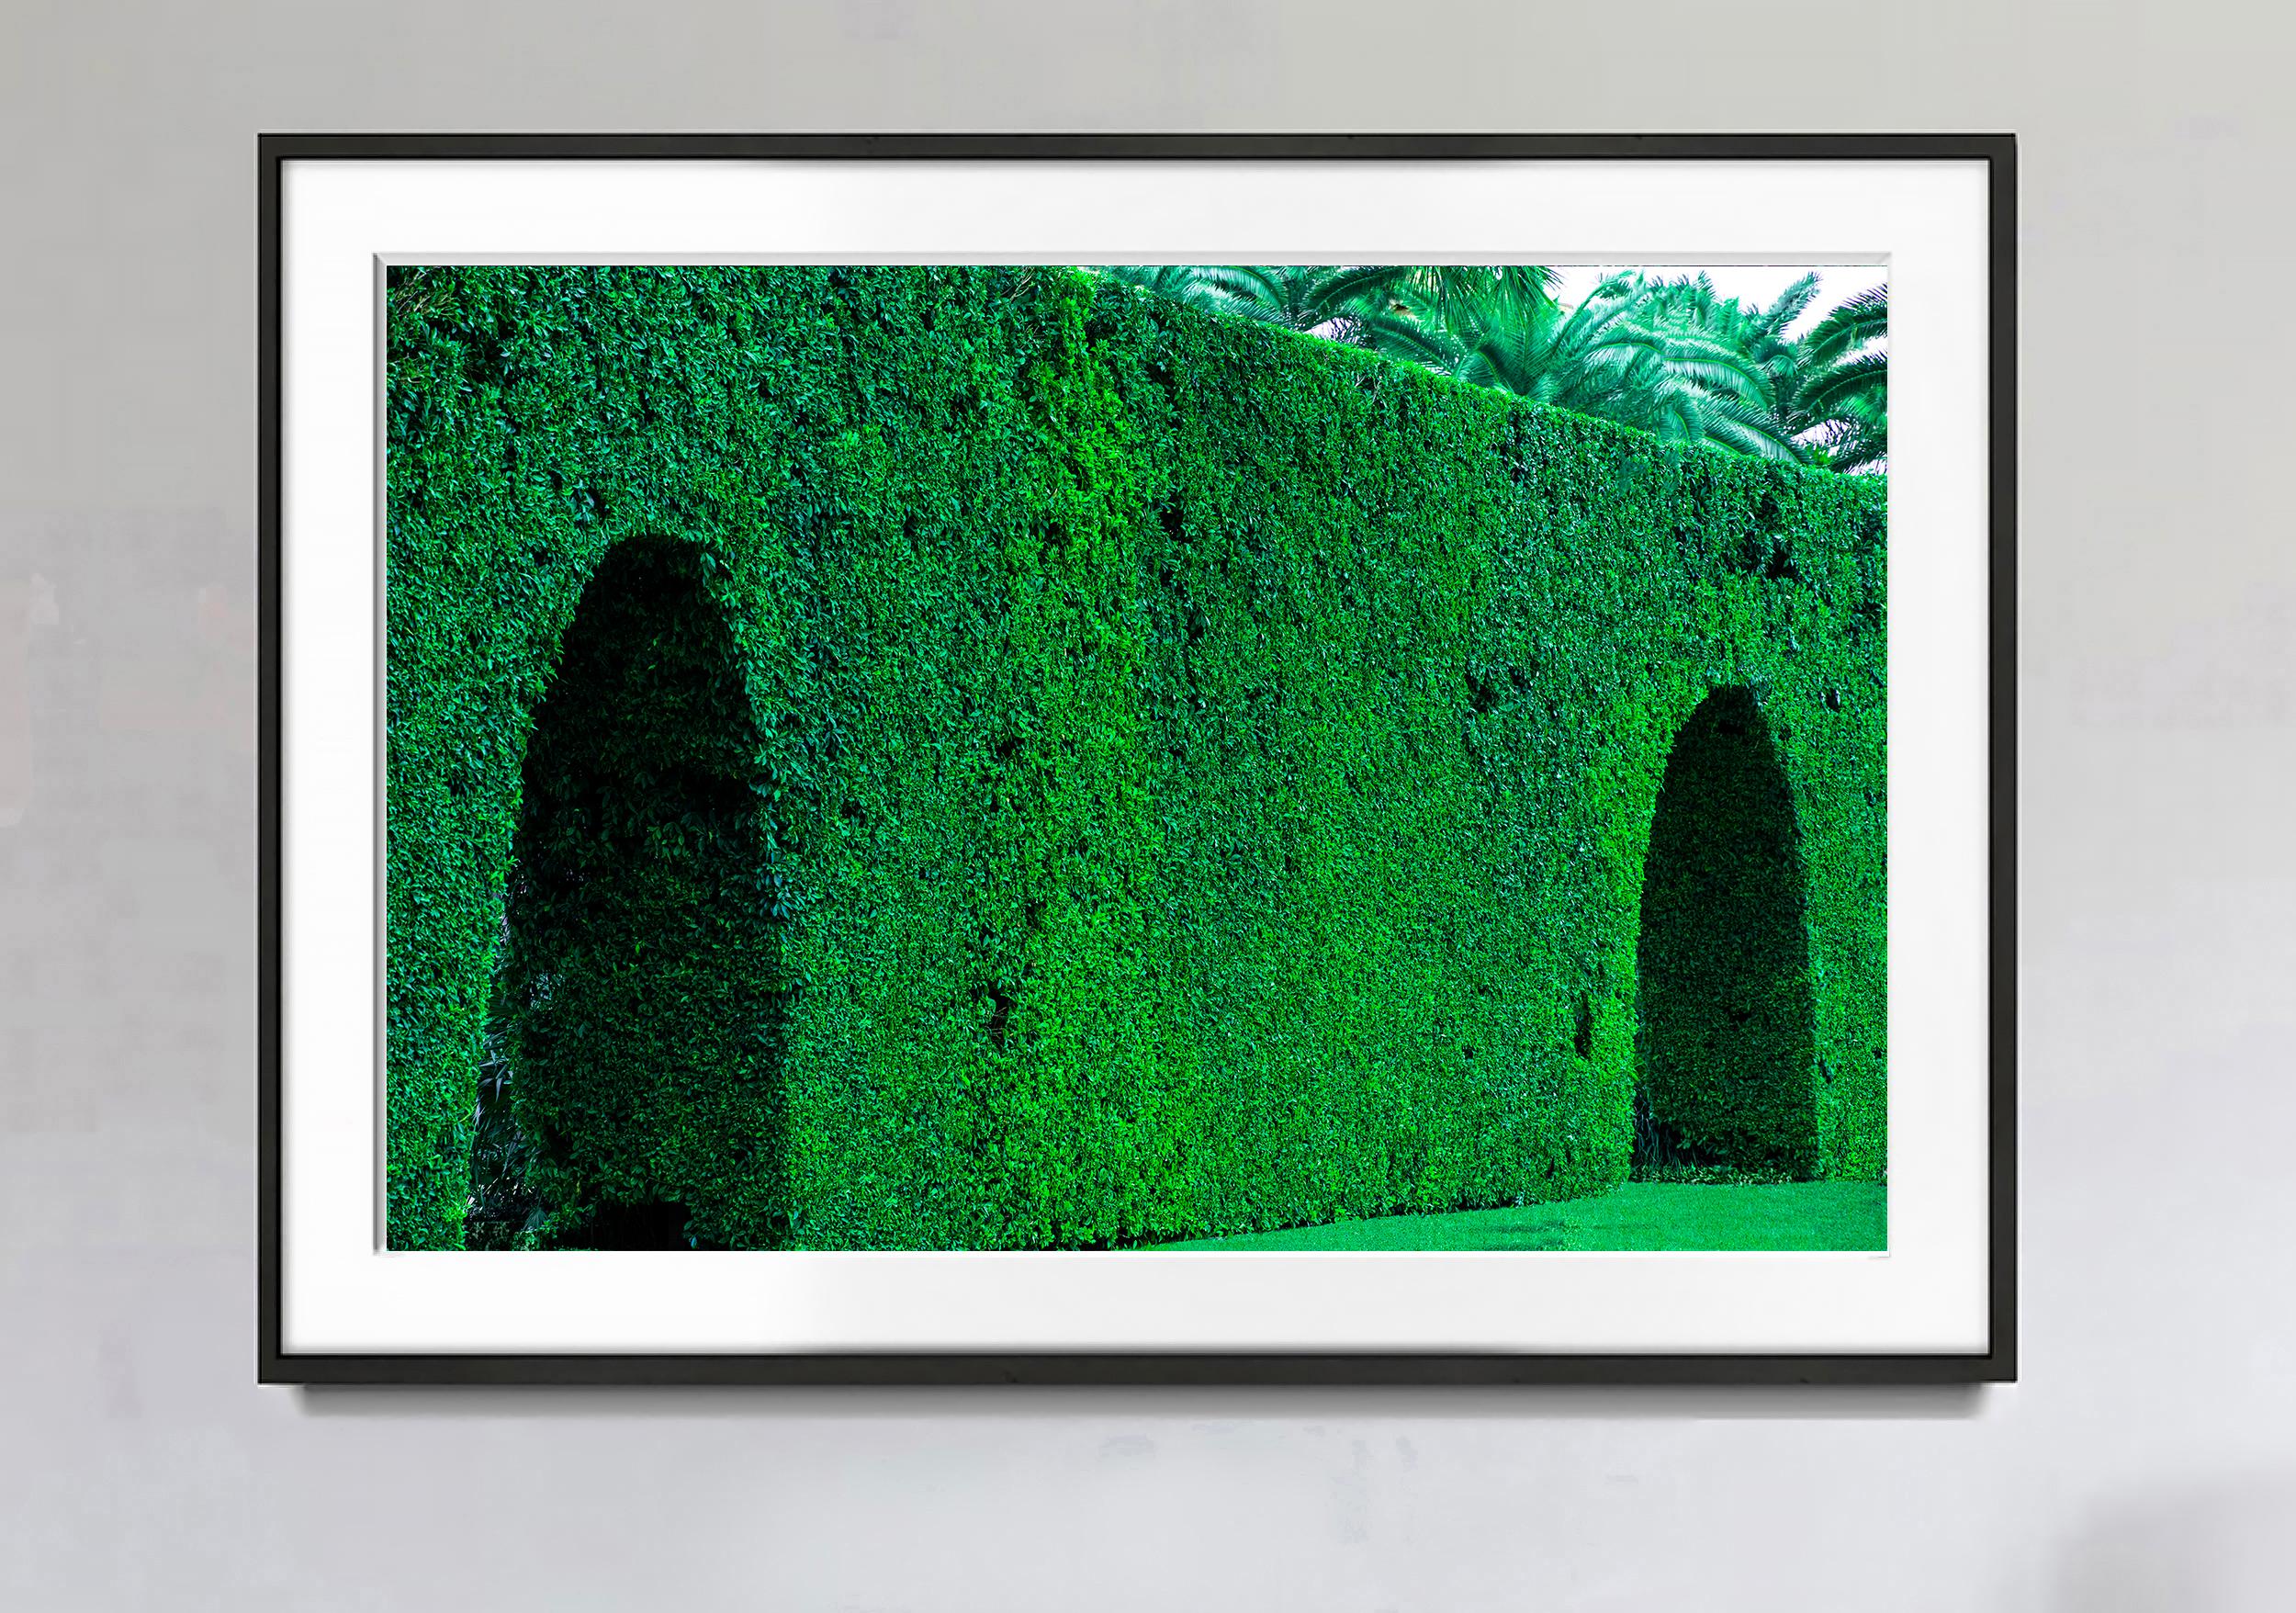 Hedge Fun - Two Arches, Palm Beach -  Slim Arrons forgot to shoot the Shrubs  - Photograph by Robert Funk